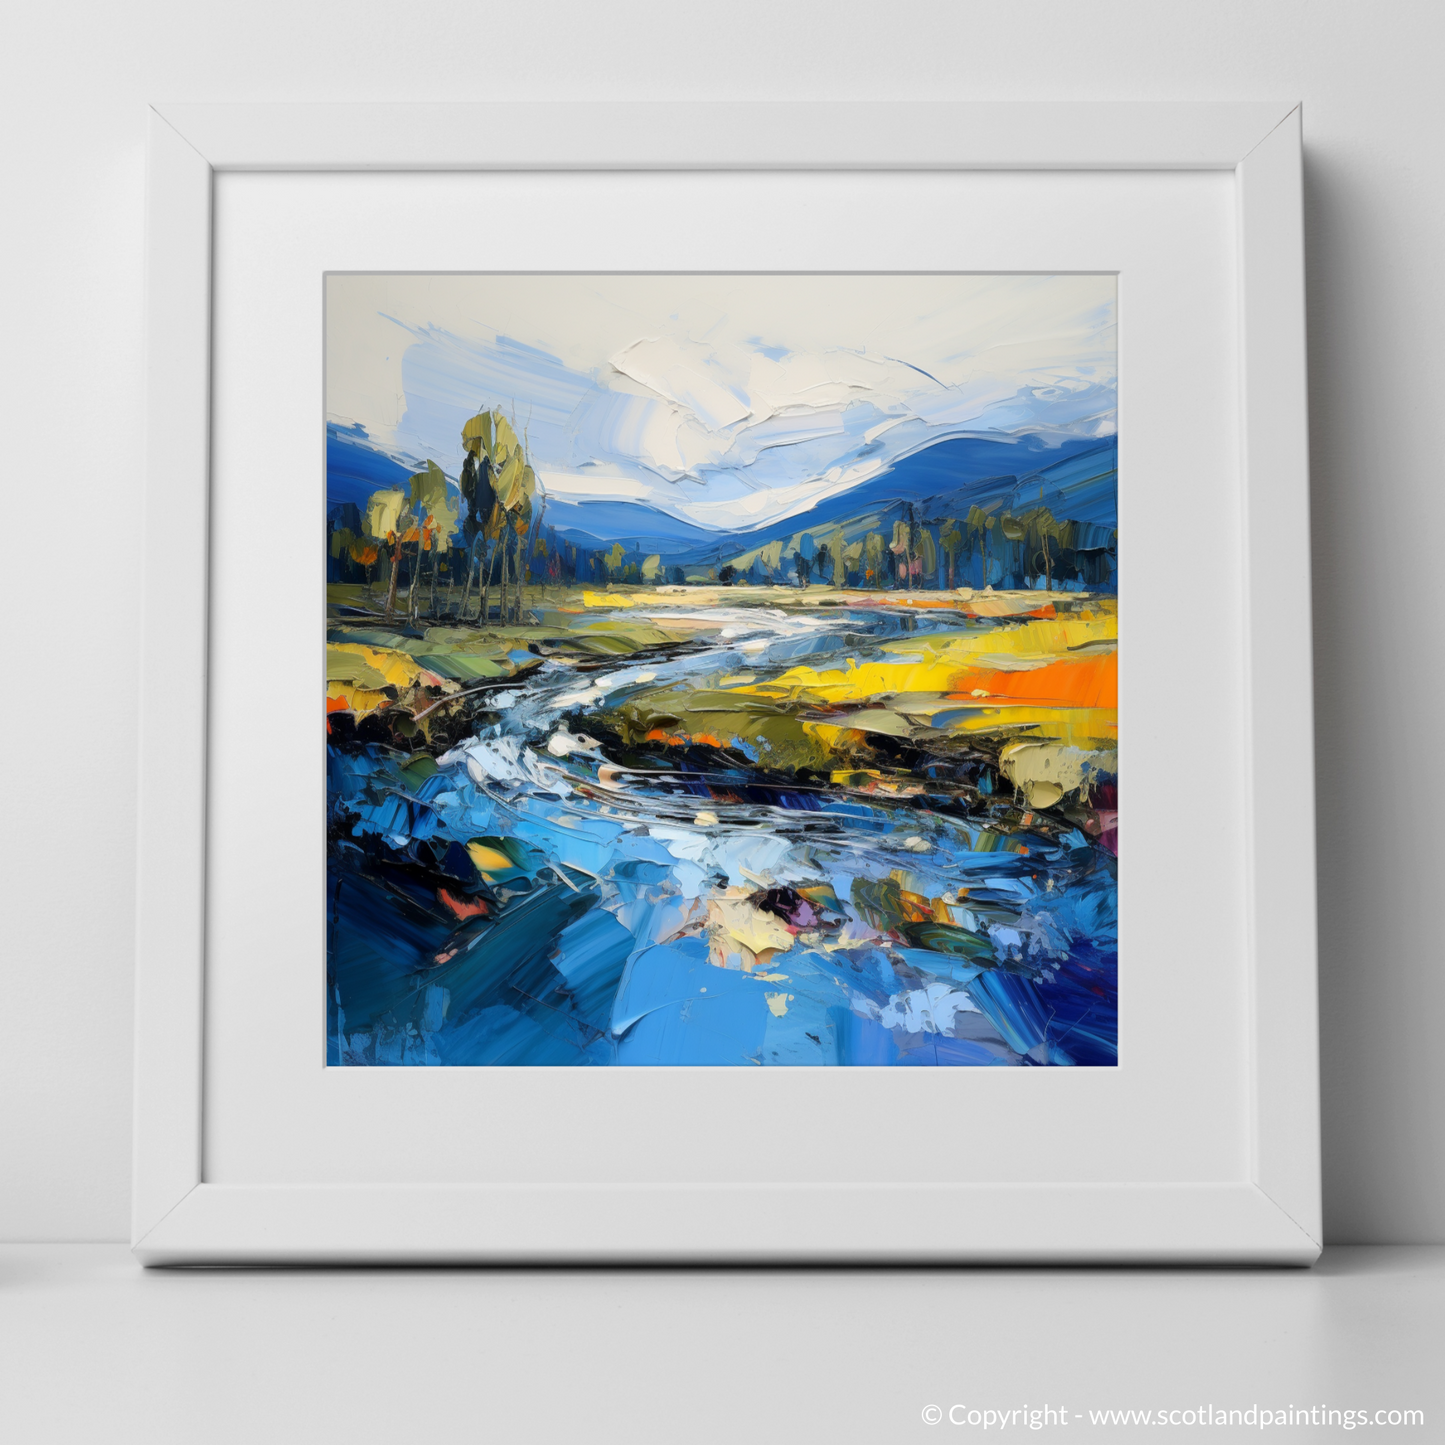 Art Print of River Spey, Highlands with a white frame